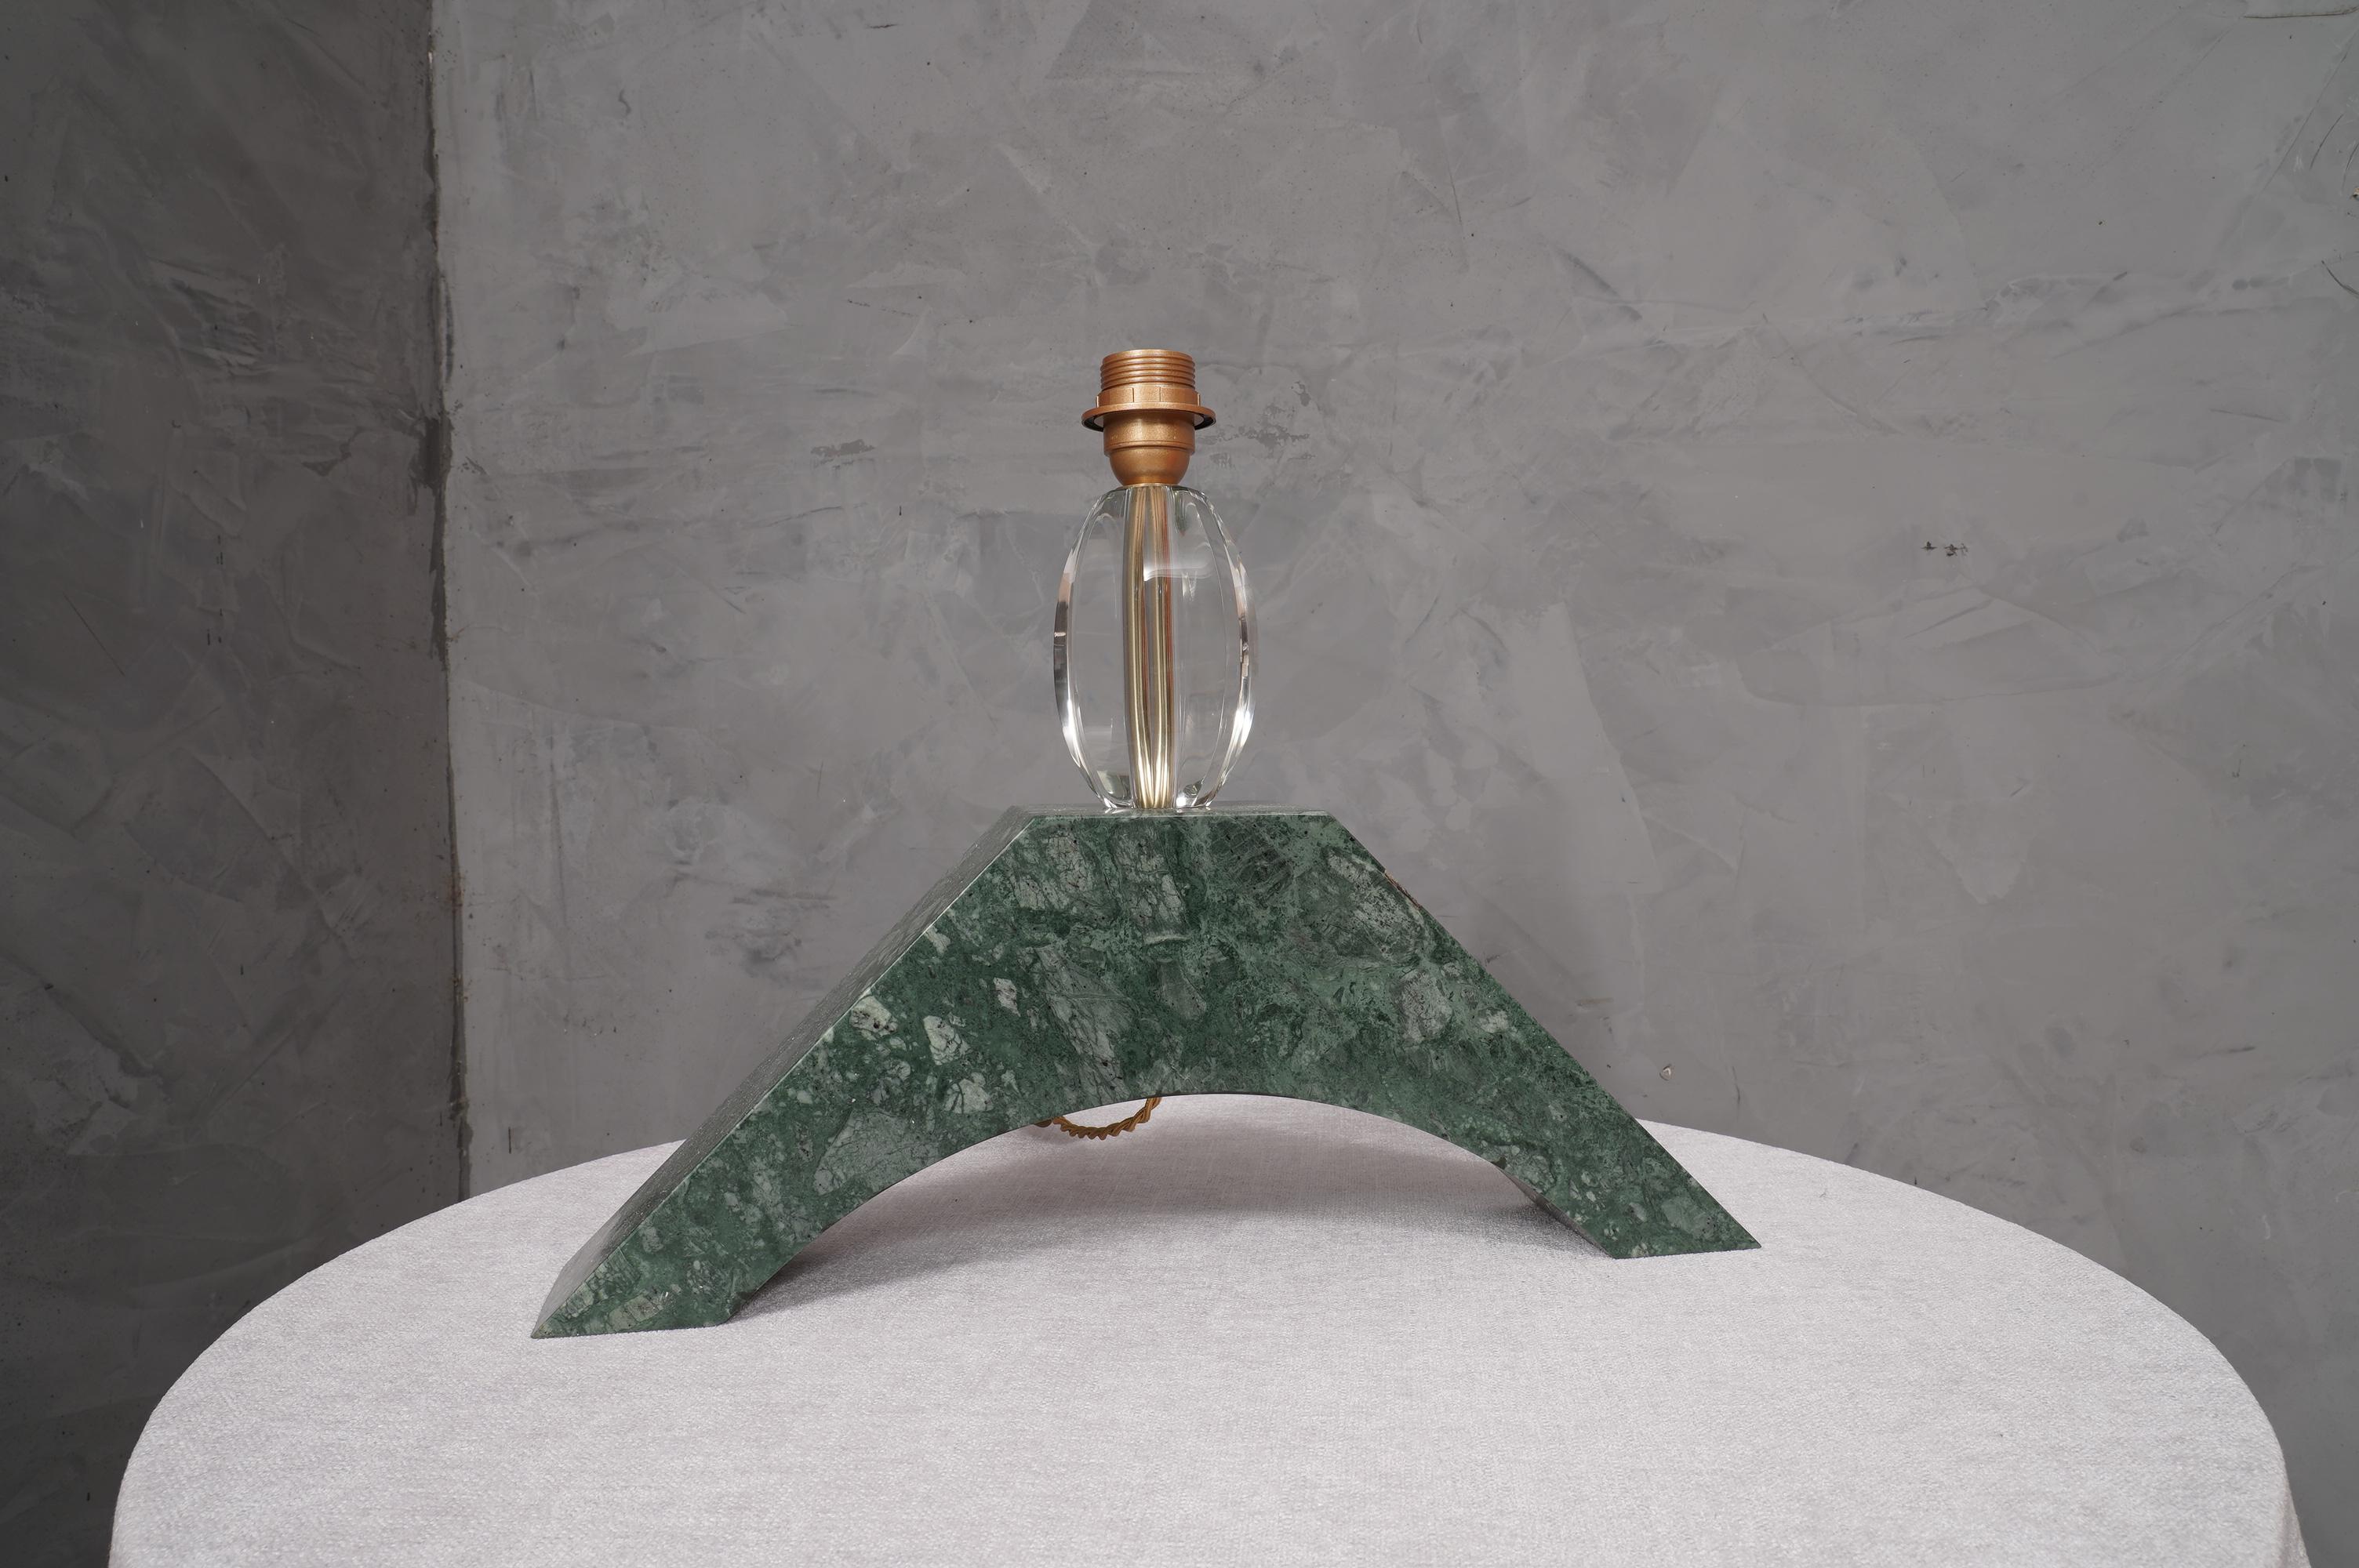 Indian Green Marble and Murano Glass Table Lamp, 2000 For Sale 2